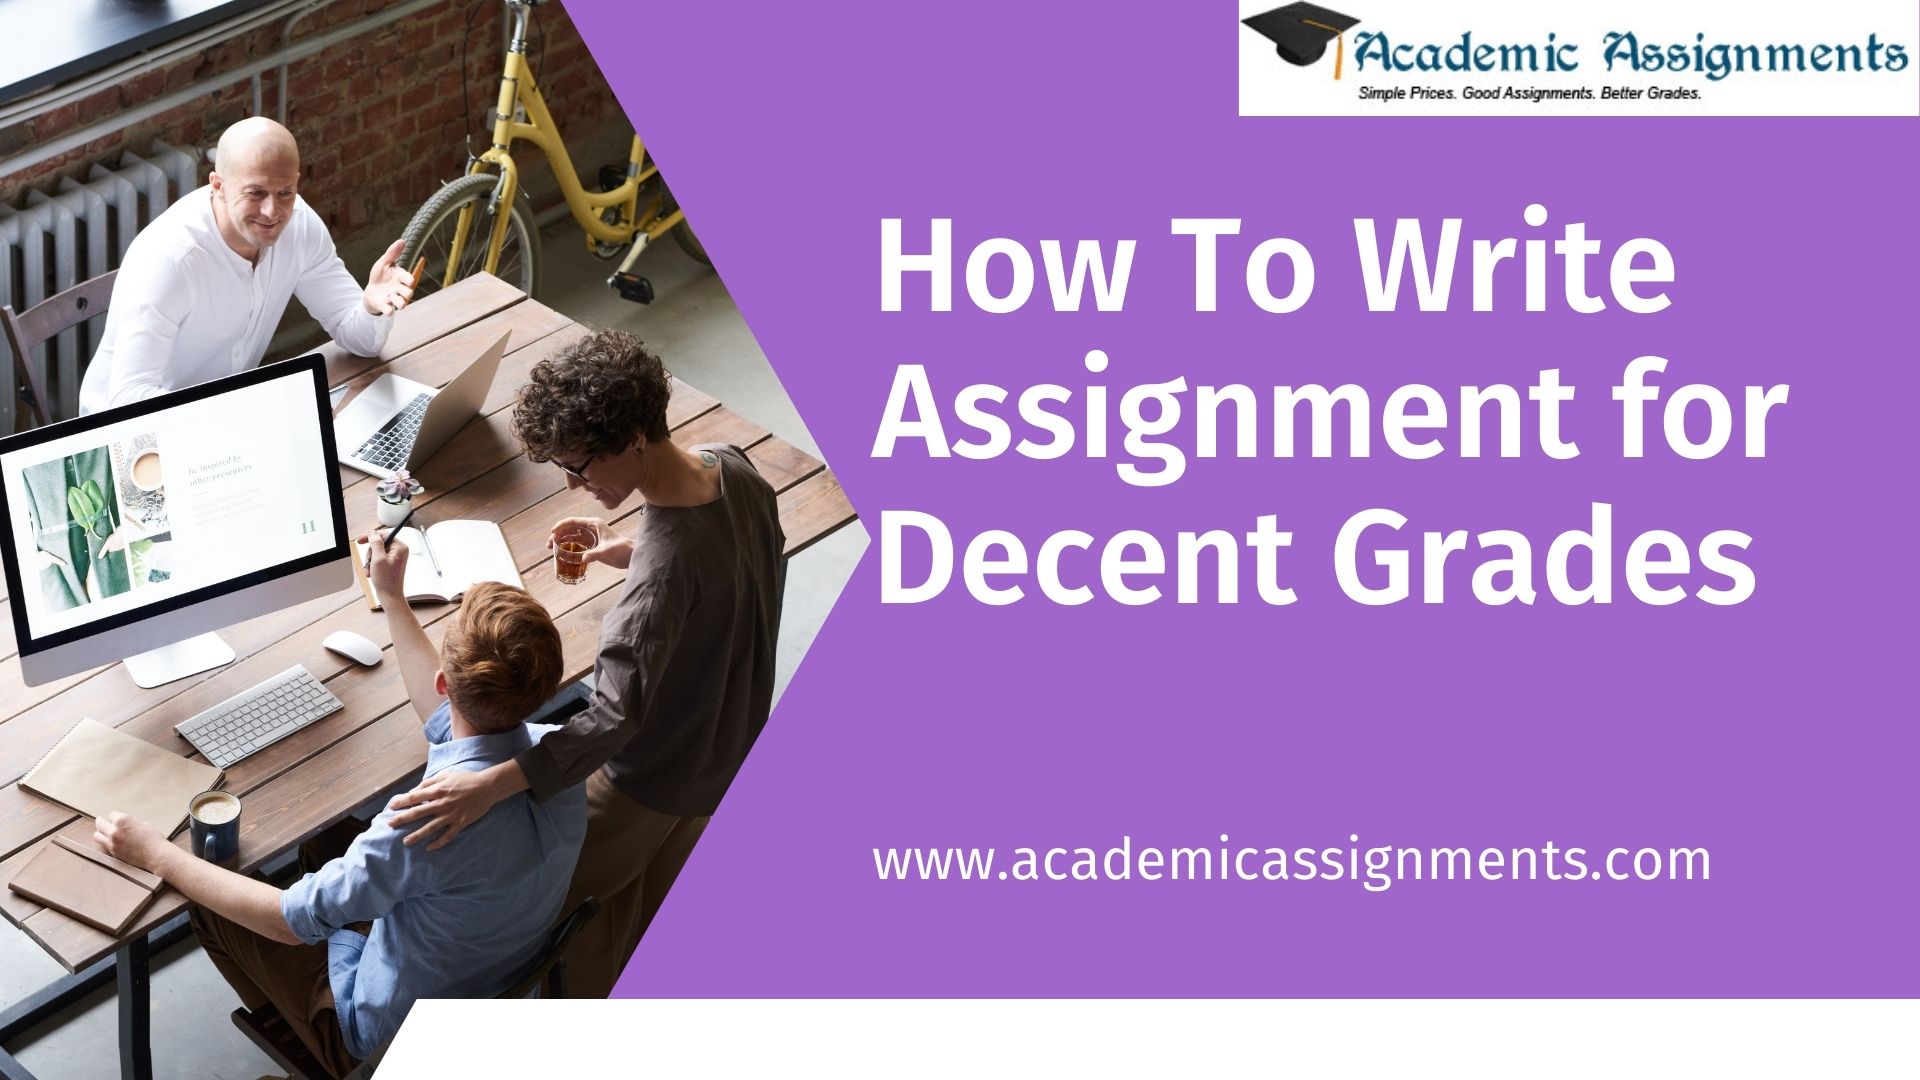 How To Write Assignment for Decent Grades